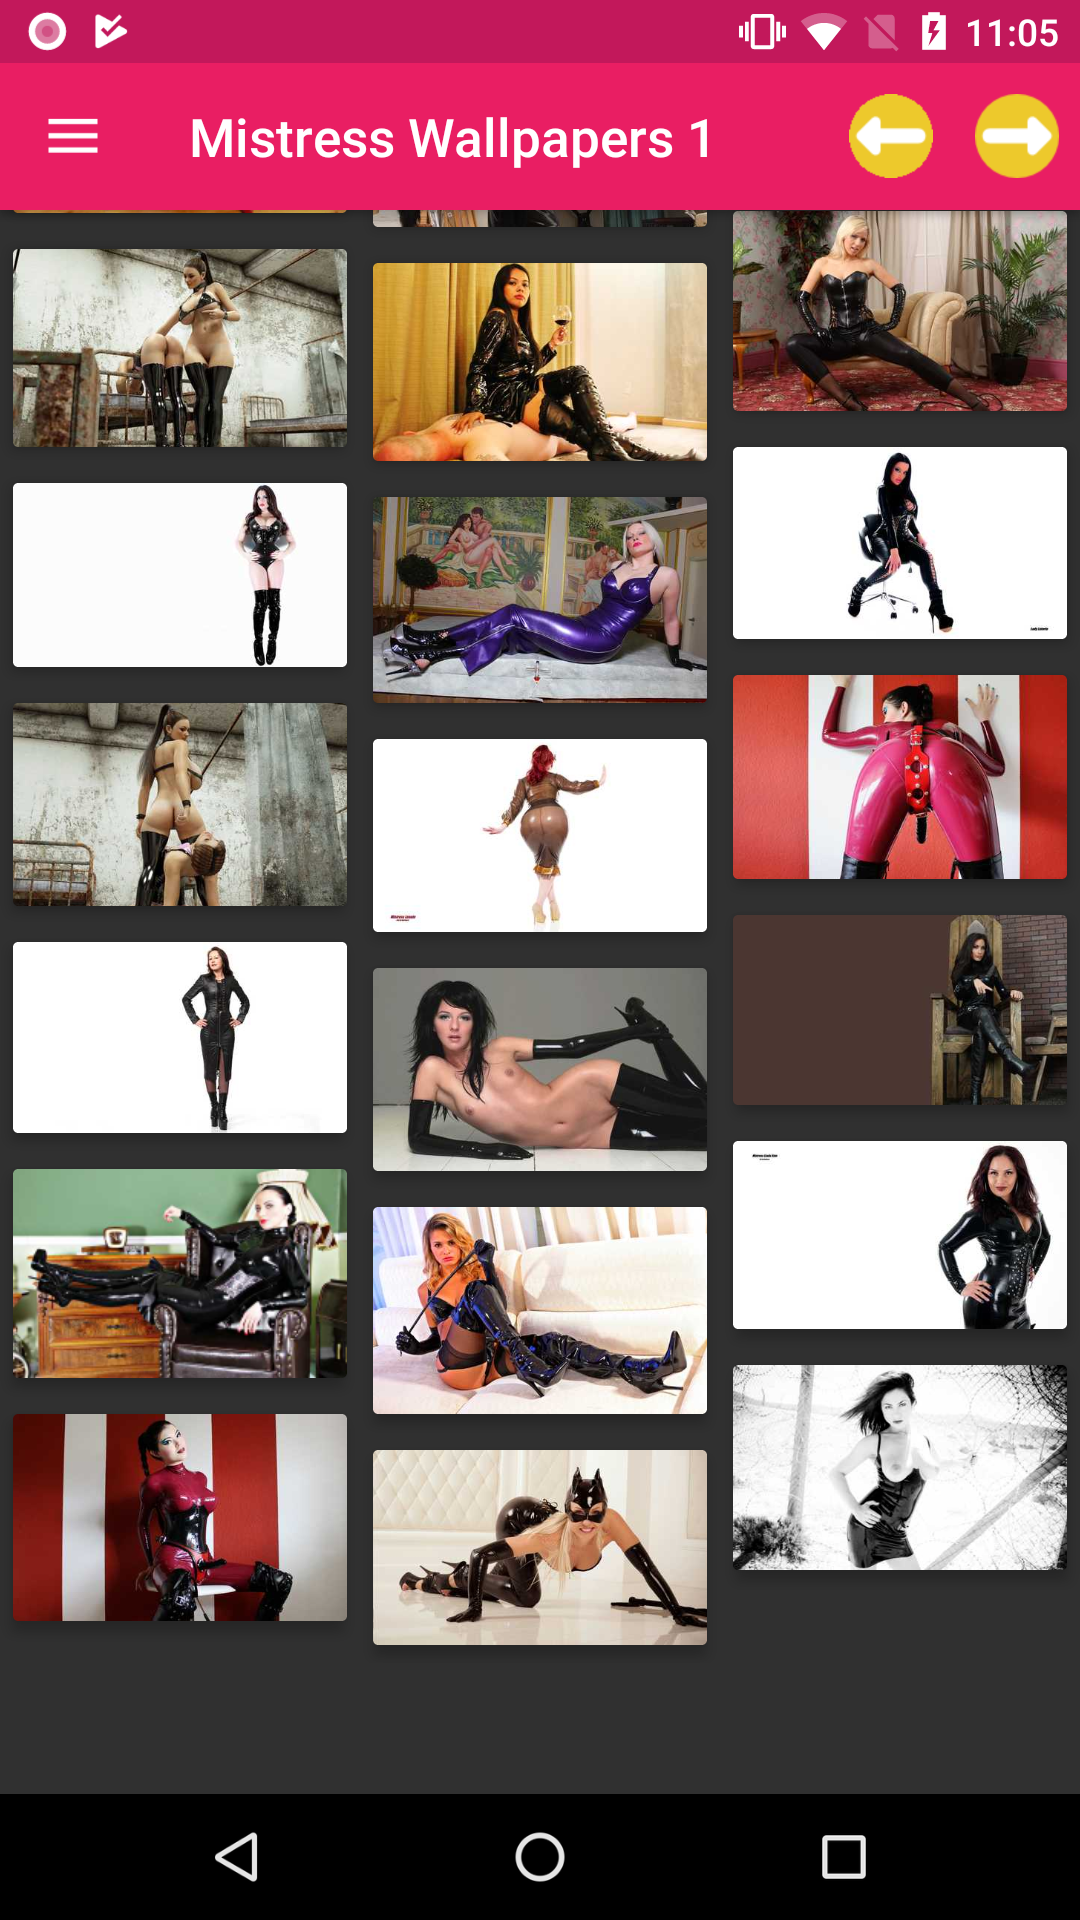 Mistress Wallpapers wallpaper,erotic,hentia,for,porn,latex,app,android,picture,puzzles,mistress,pics,watching,panties,henti,apps,bdsm,download,wallpapers,hentai,excuses,femdom,sexy,domination,pic,phone